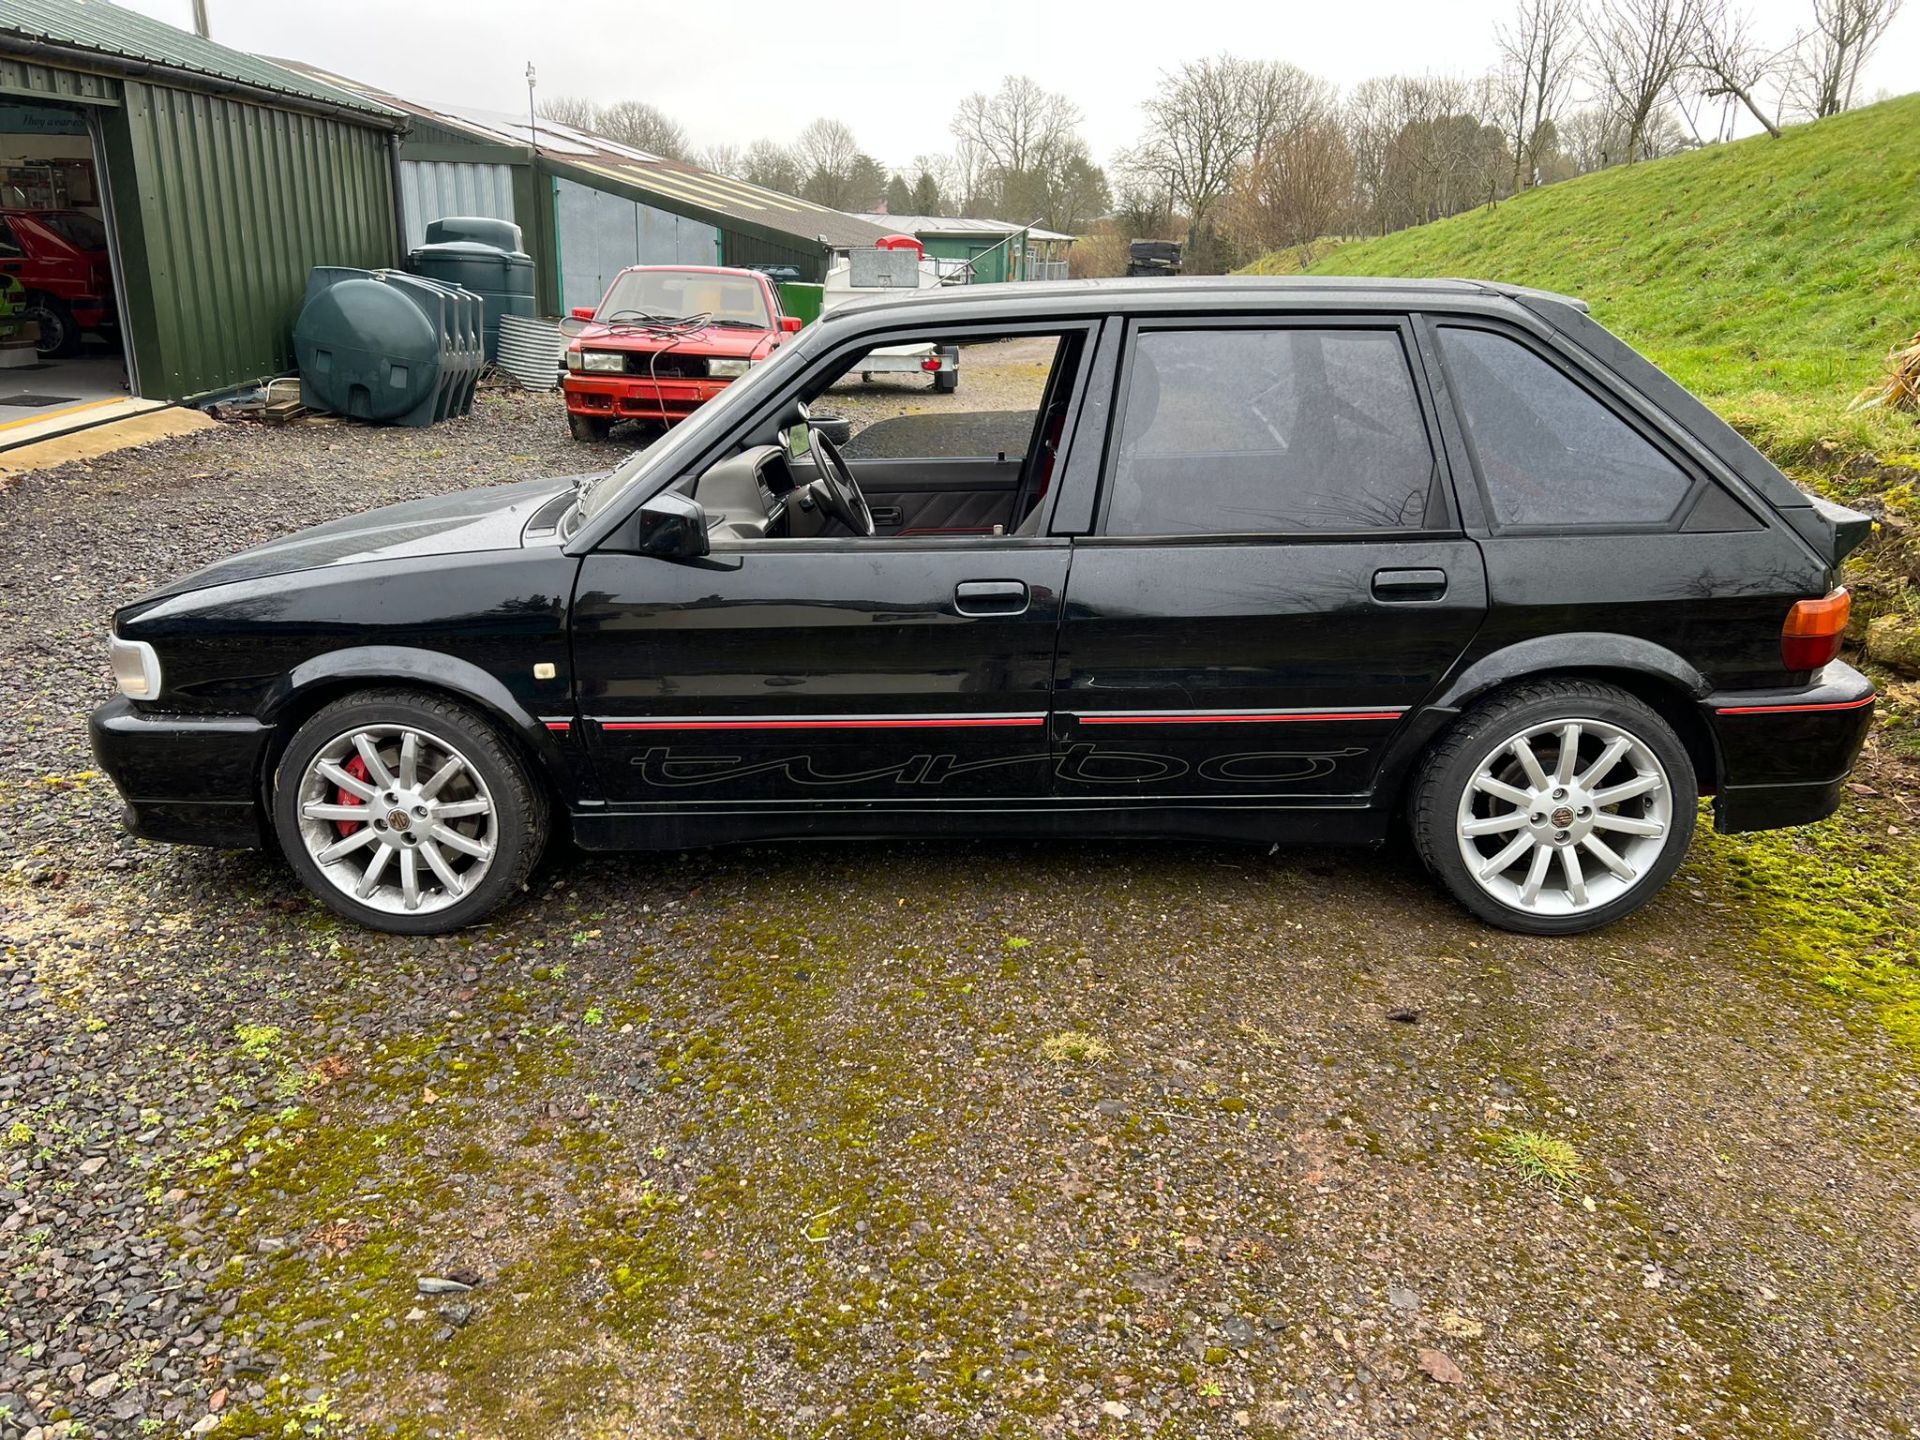 MG Bundle; MG Montego Turbo 1988, Rover MG Maestro Turbo 1990, and an MG Turbo engine and gearbox. - Image 20 of 30